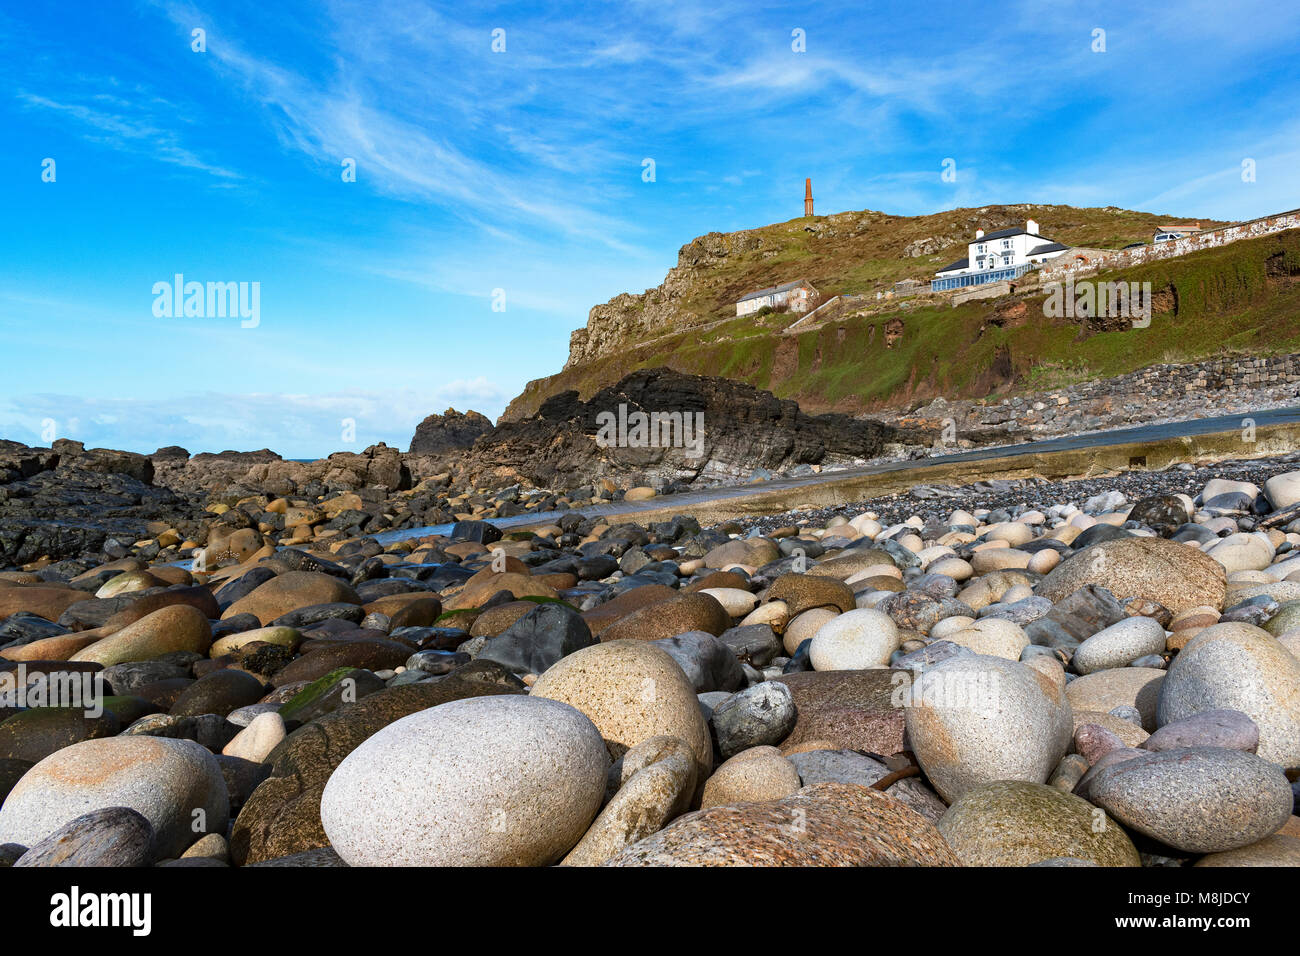 the headland promontory of cape cornwall viewed from priests cove near st.just, penwith, cornwall, england, britain, uk. Stock Photo